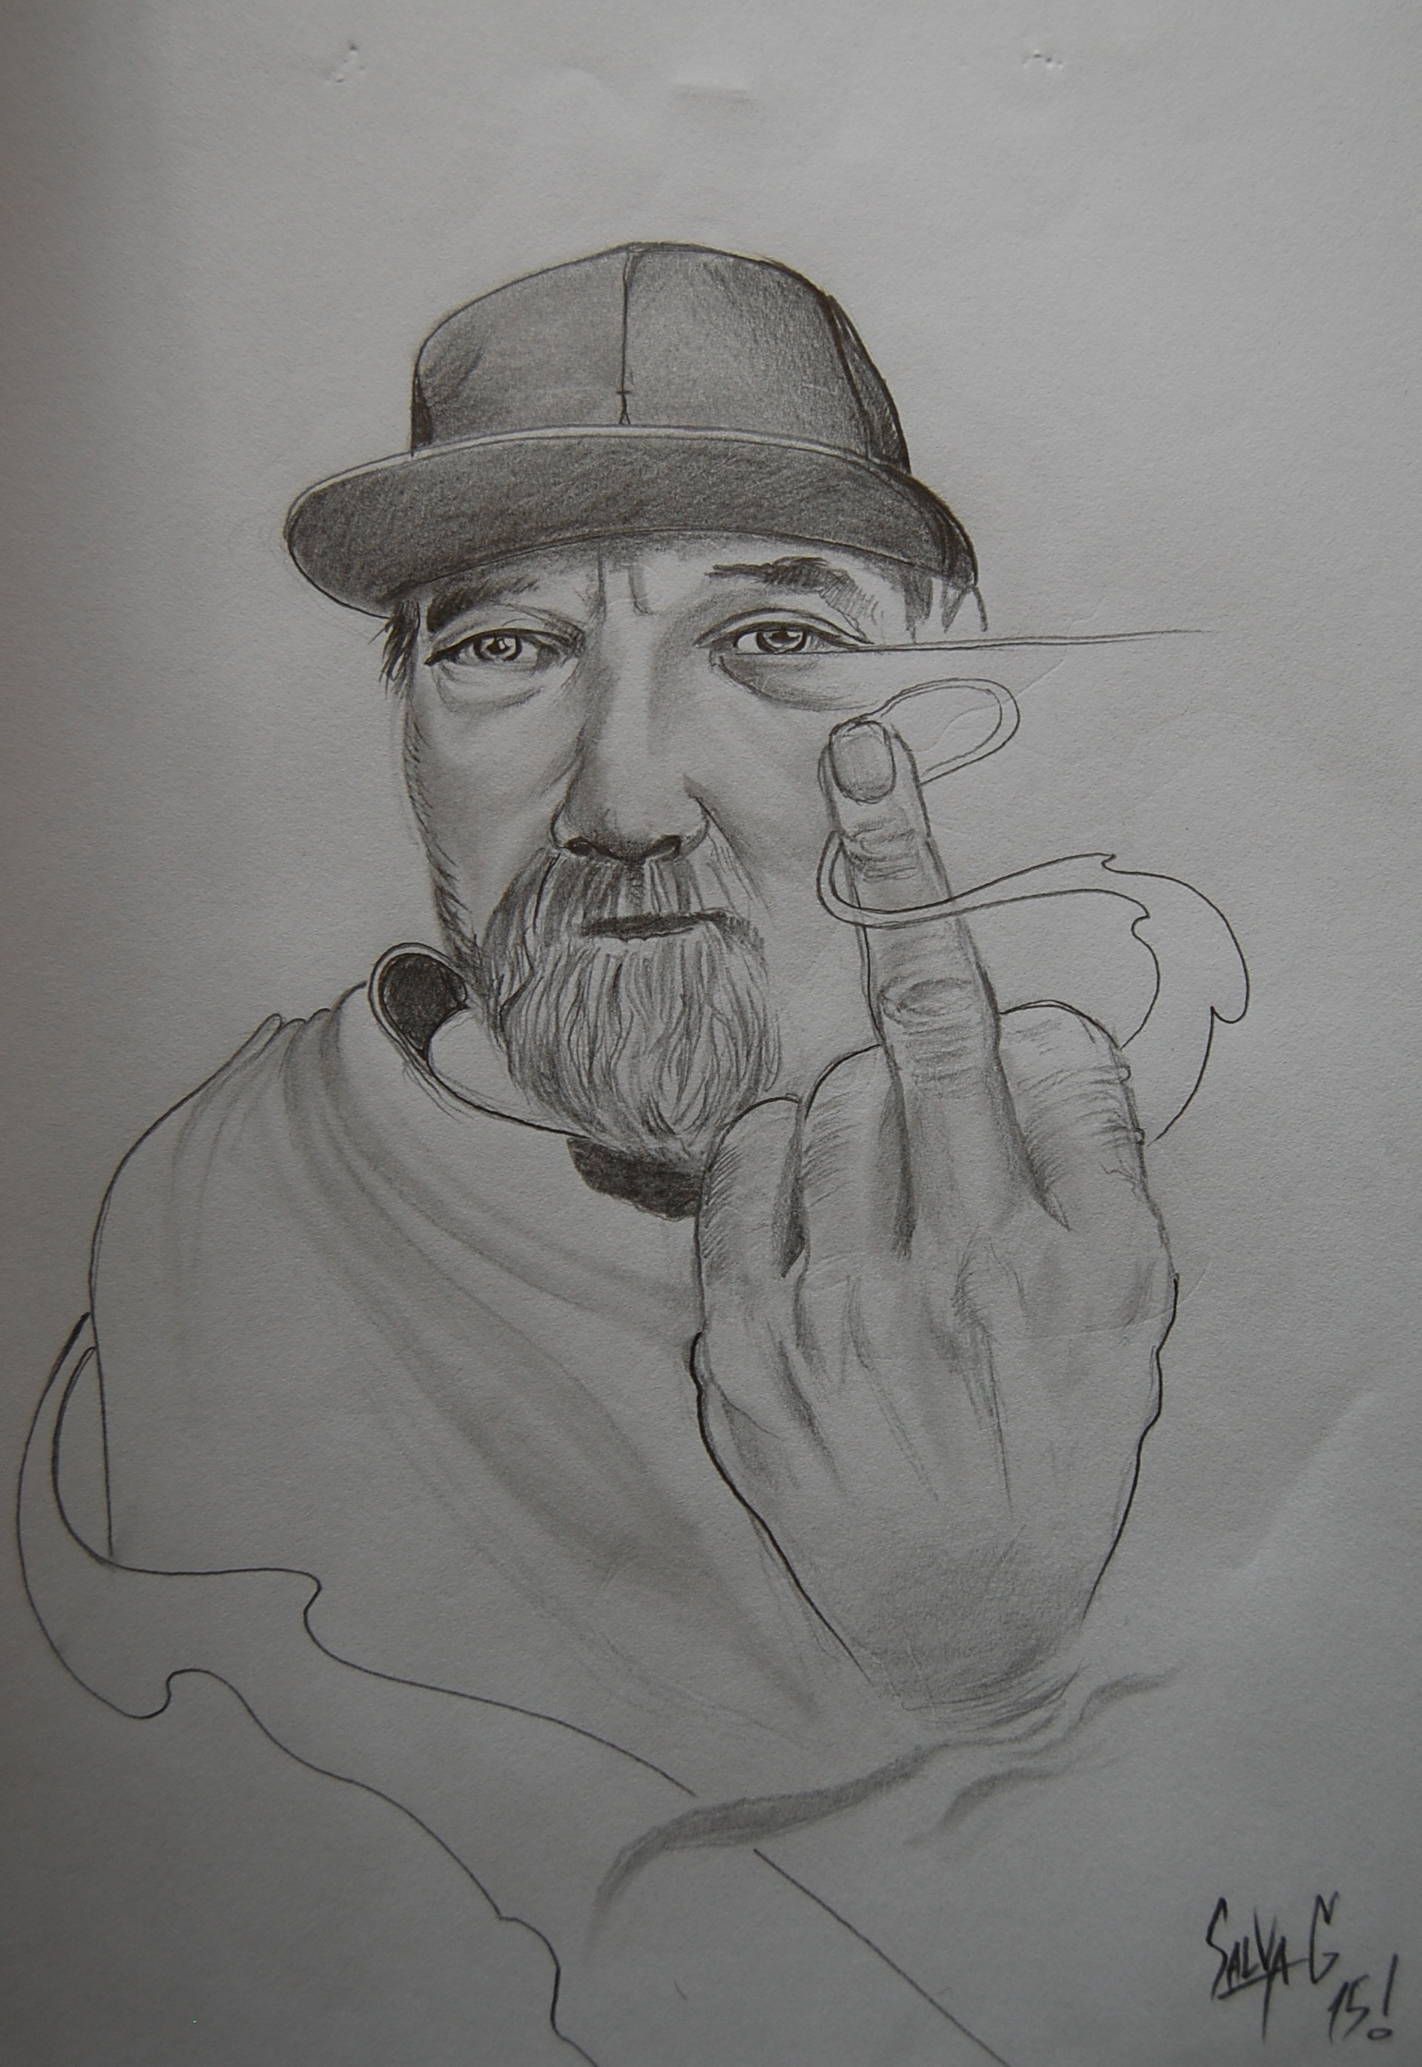 a drawing of a man smoking his cigarette